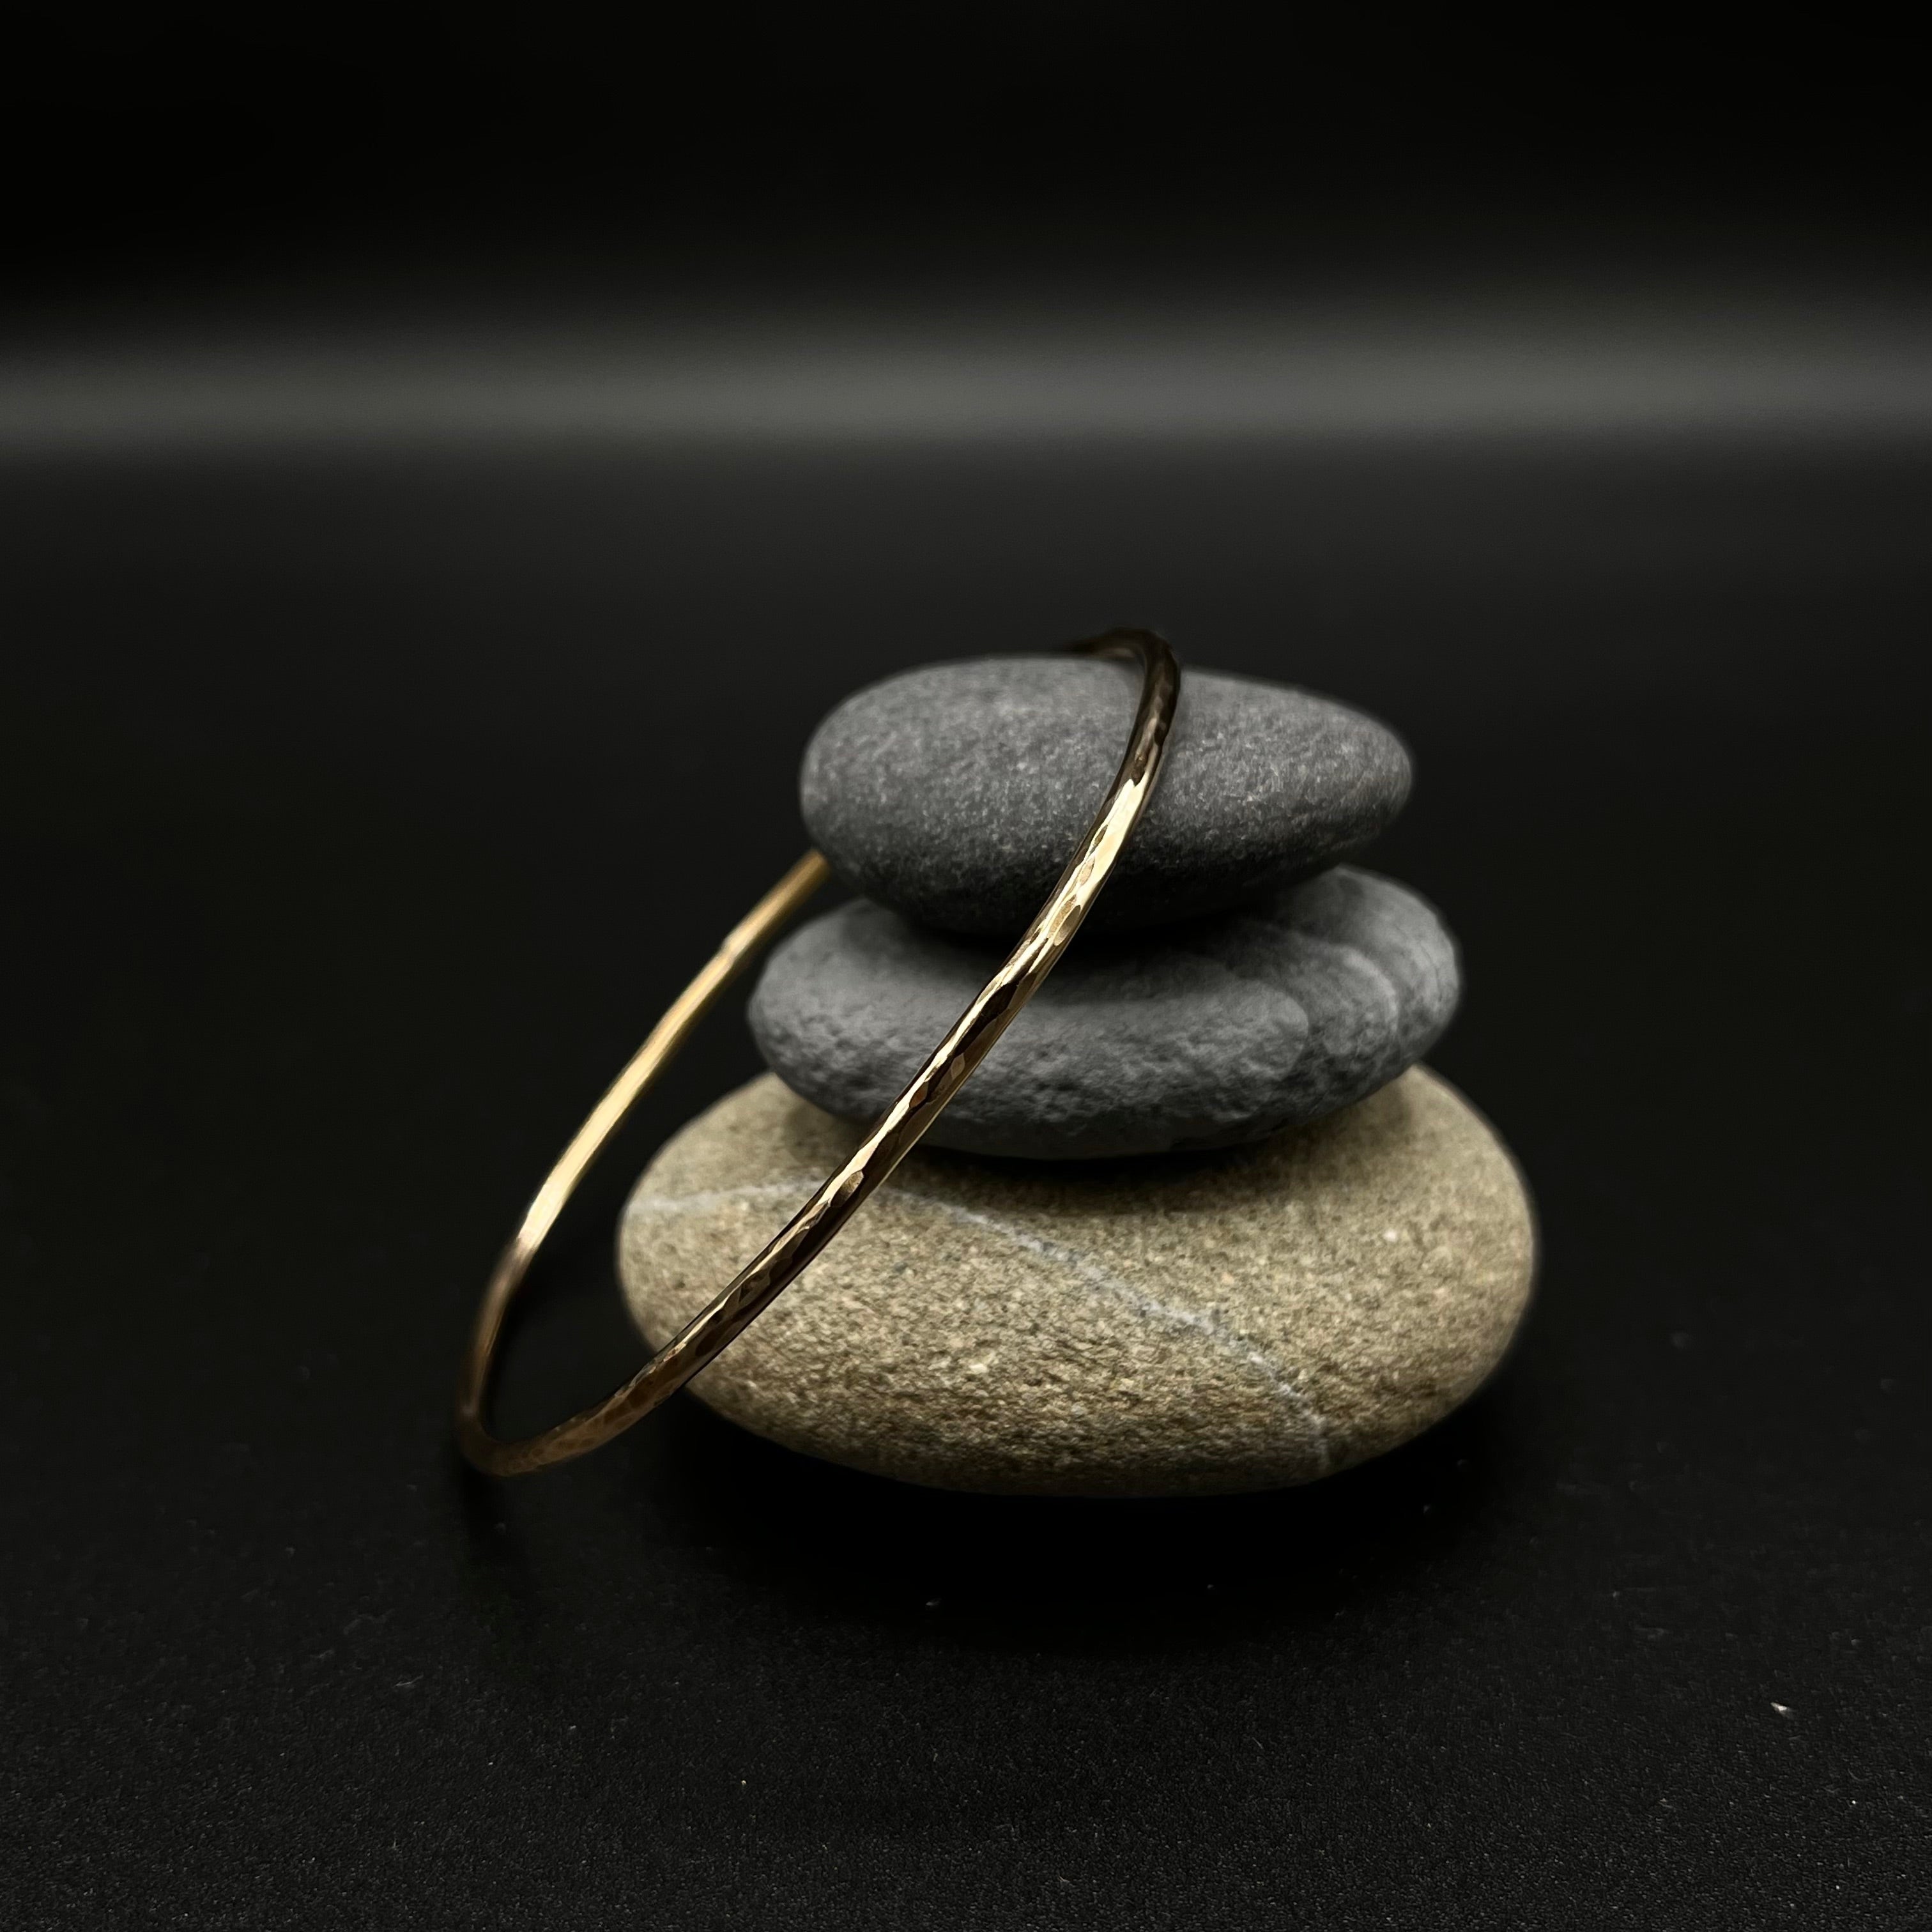 9ct Yellow gold Bangle. Round wire hammered, polished finish